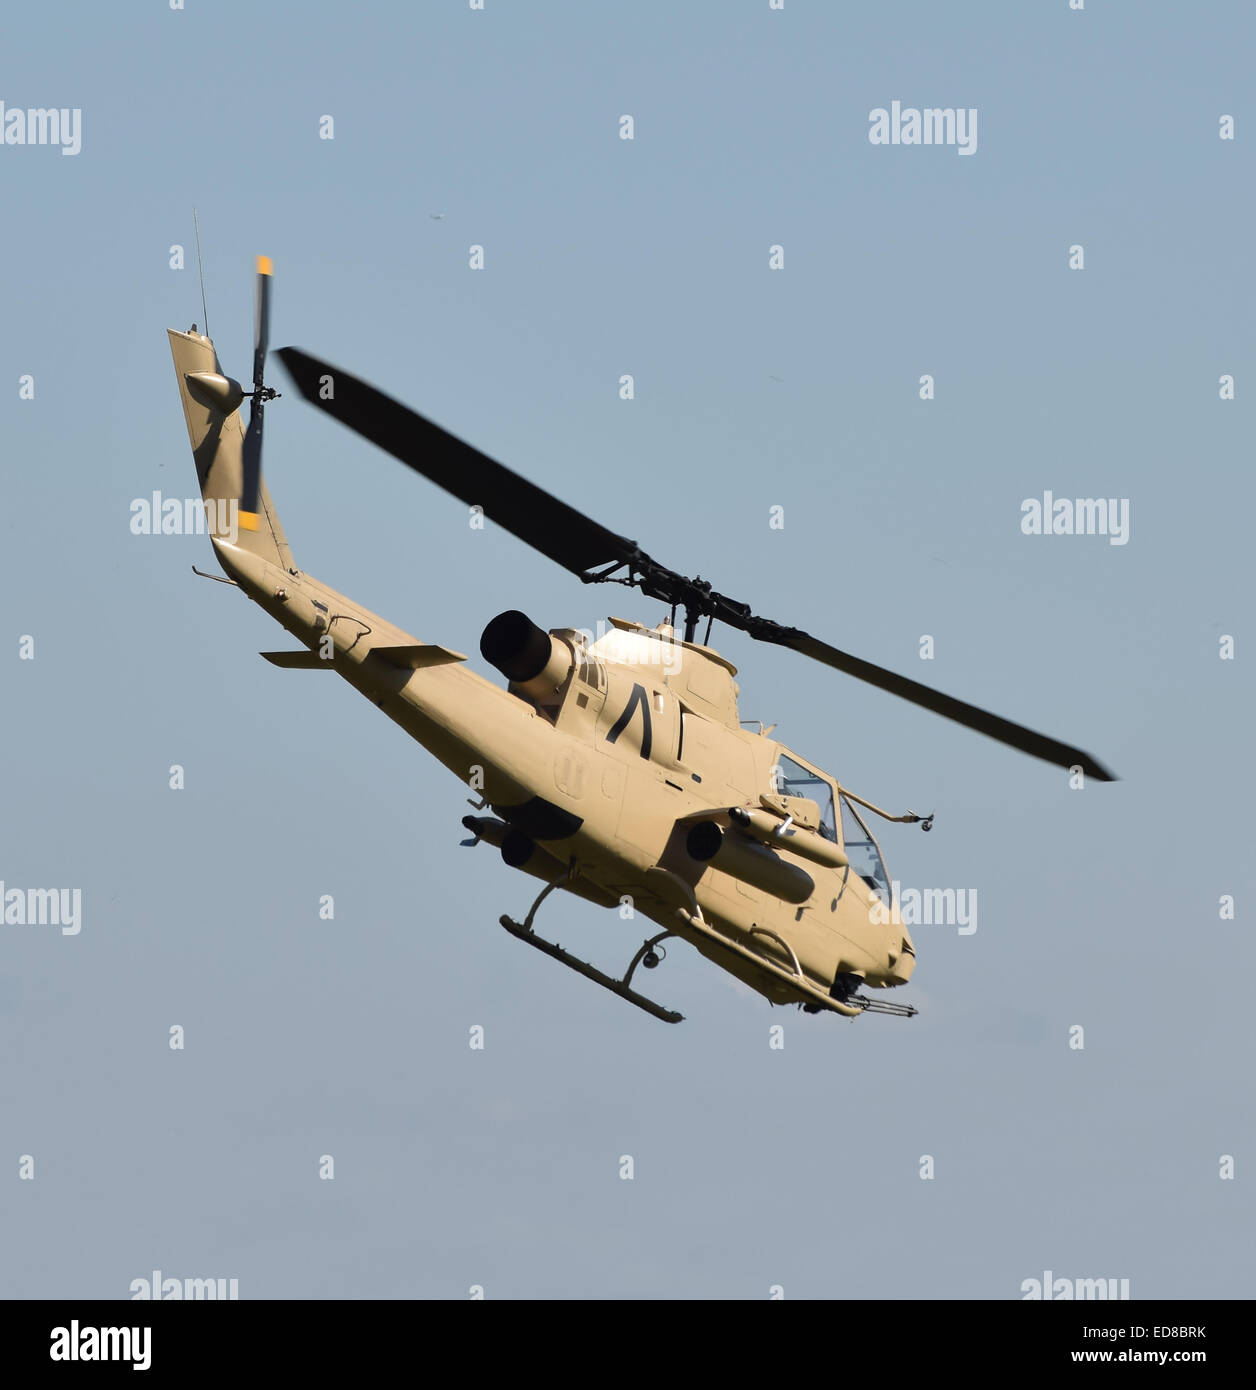 Vietnam War era military helicopter departing on a mission Bell AH-1 Cobra Stock Photo